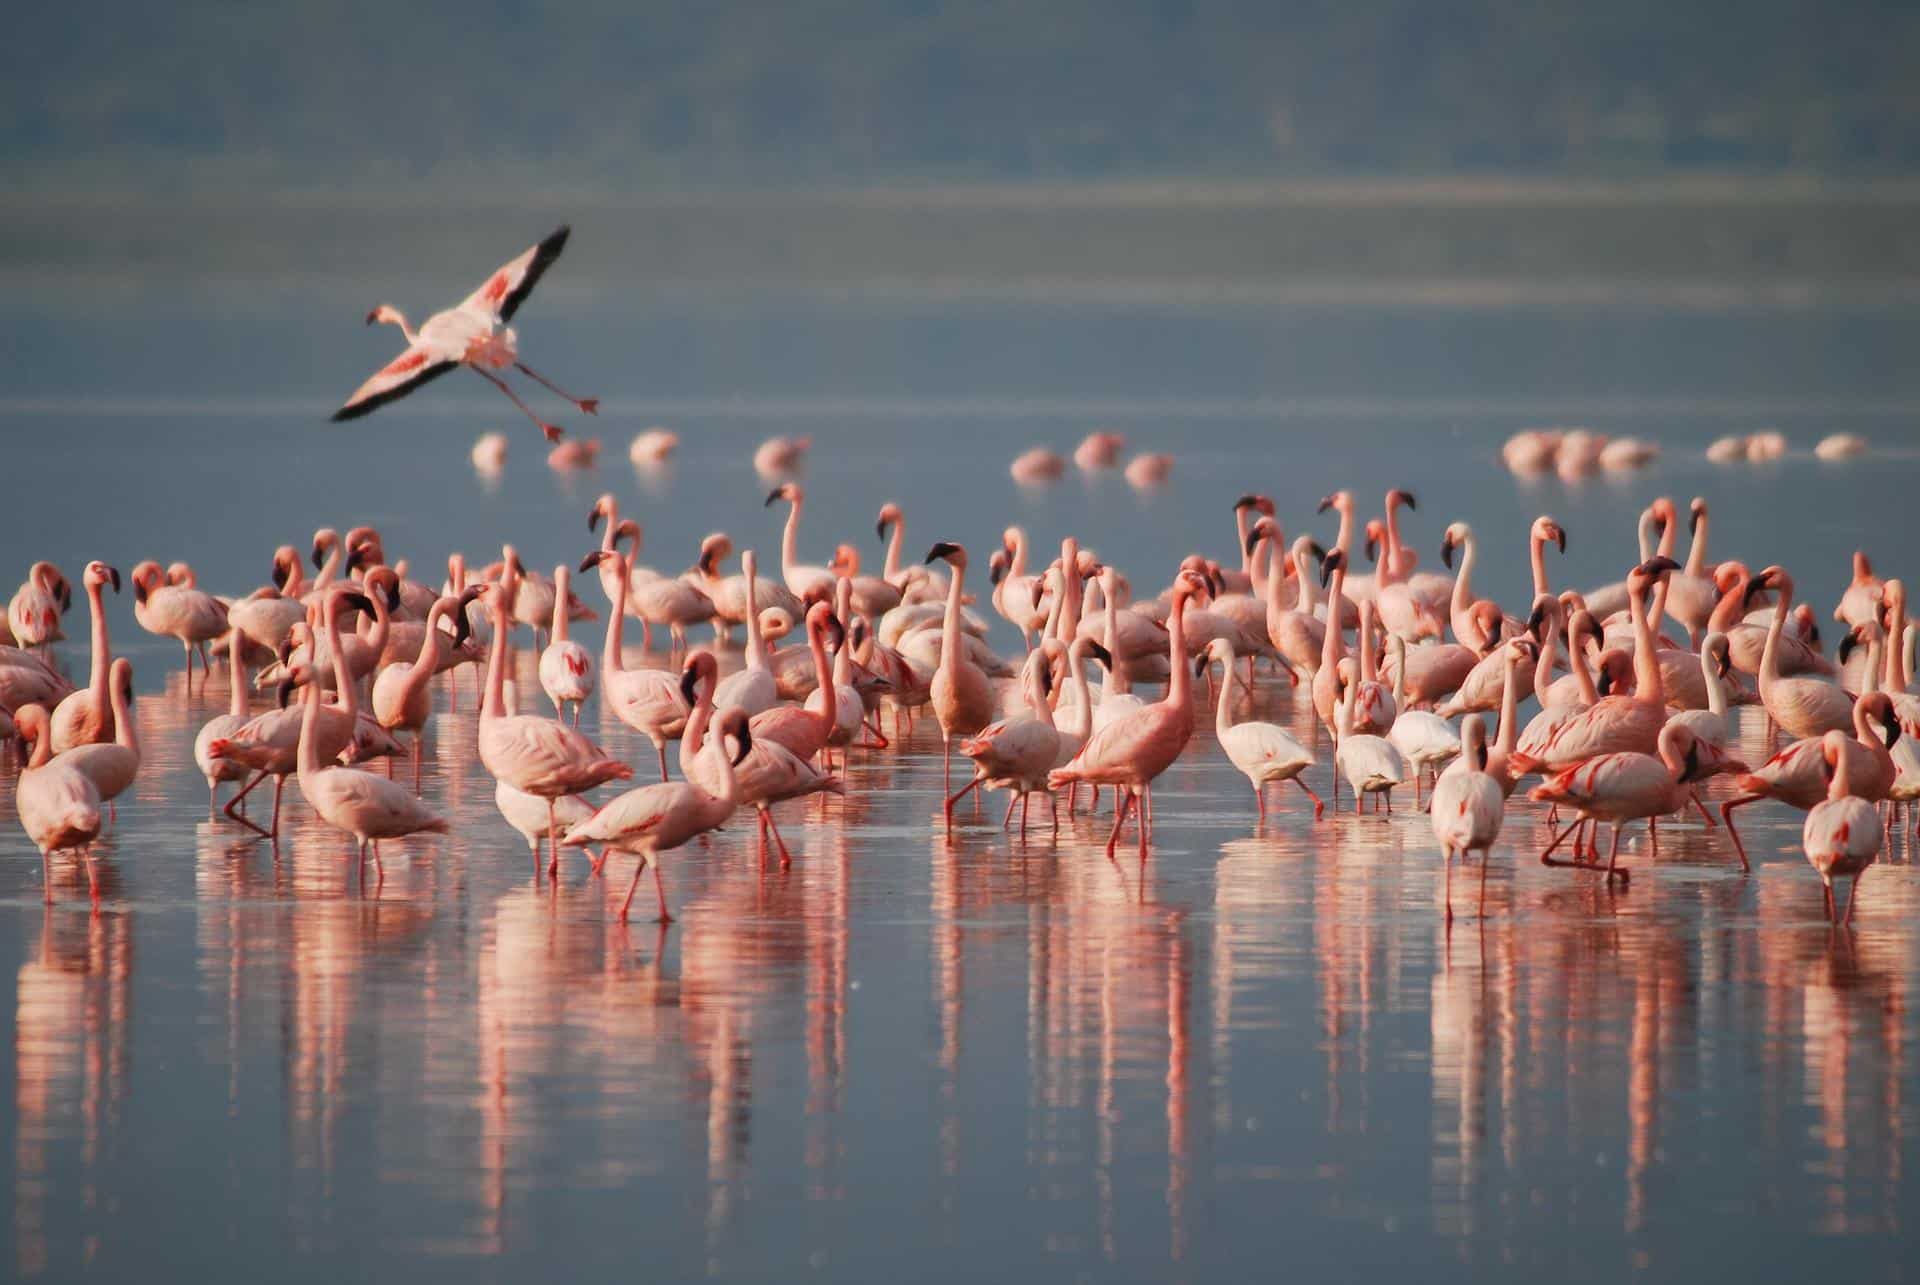 Do Flamingos Live In Groups? What Is A Group Of Flamingos Called?